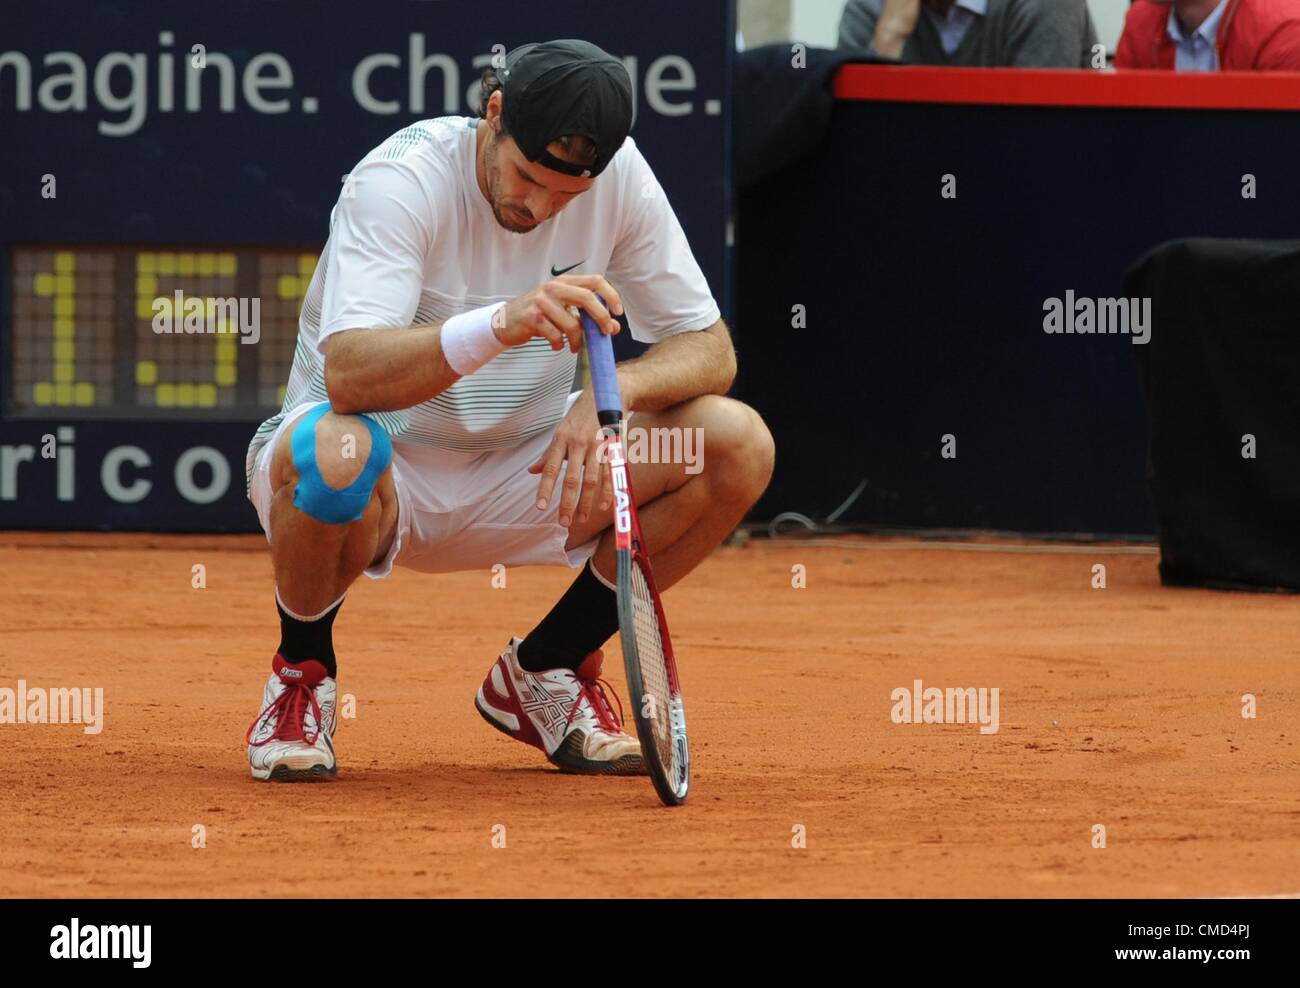 22.07.2012. Hamburg, Germany. German tennis player Tommy Haas squats during  the final of the ATP